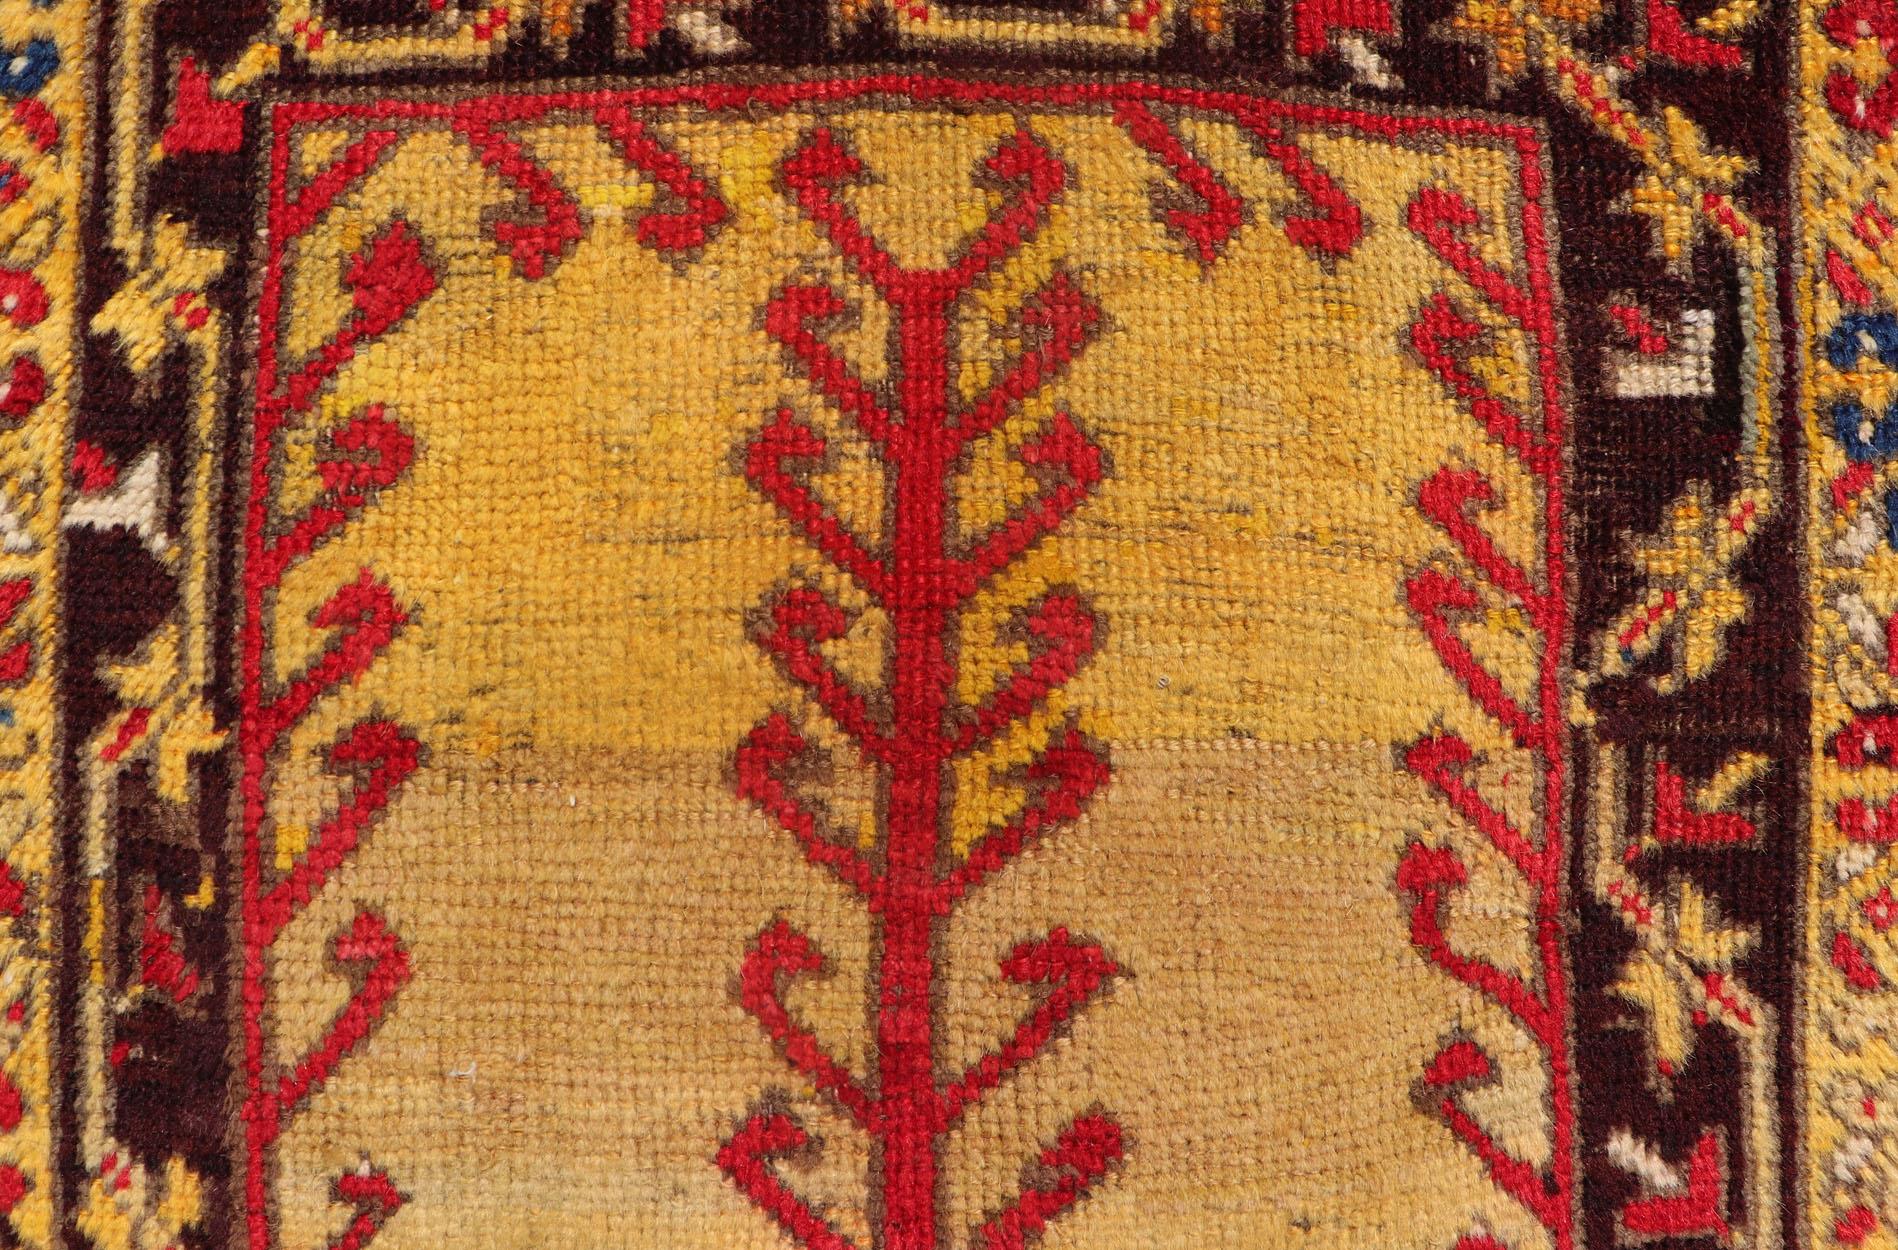 Antique Turkish Prayer Rug in Vibrant Saffron Yellow, Gold, Red and Blue In Good Condition For Sale In Atlanta, GA